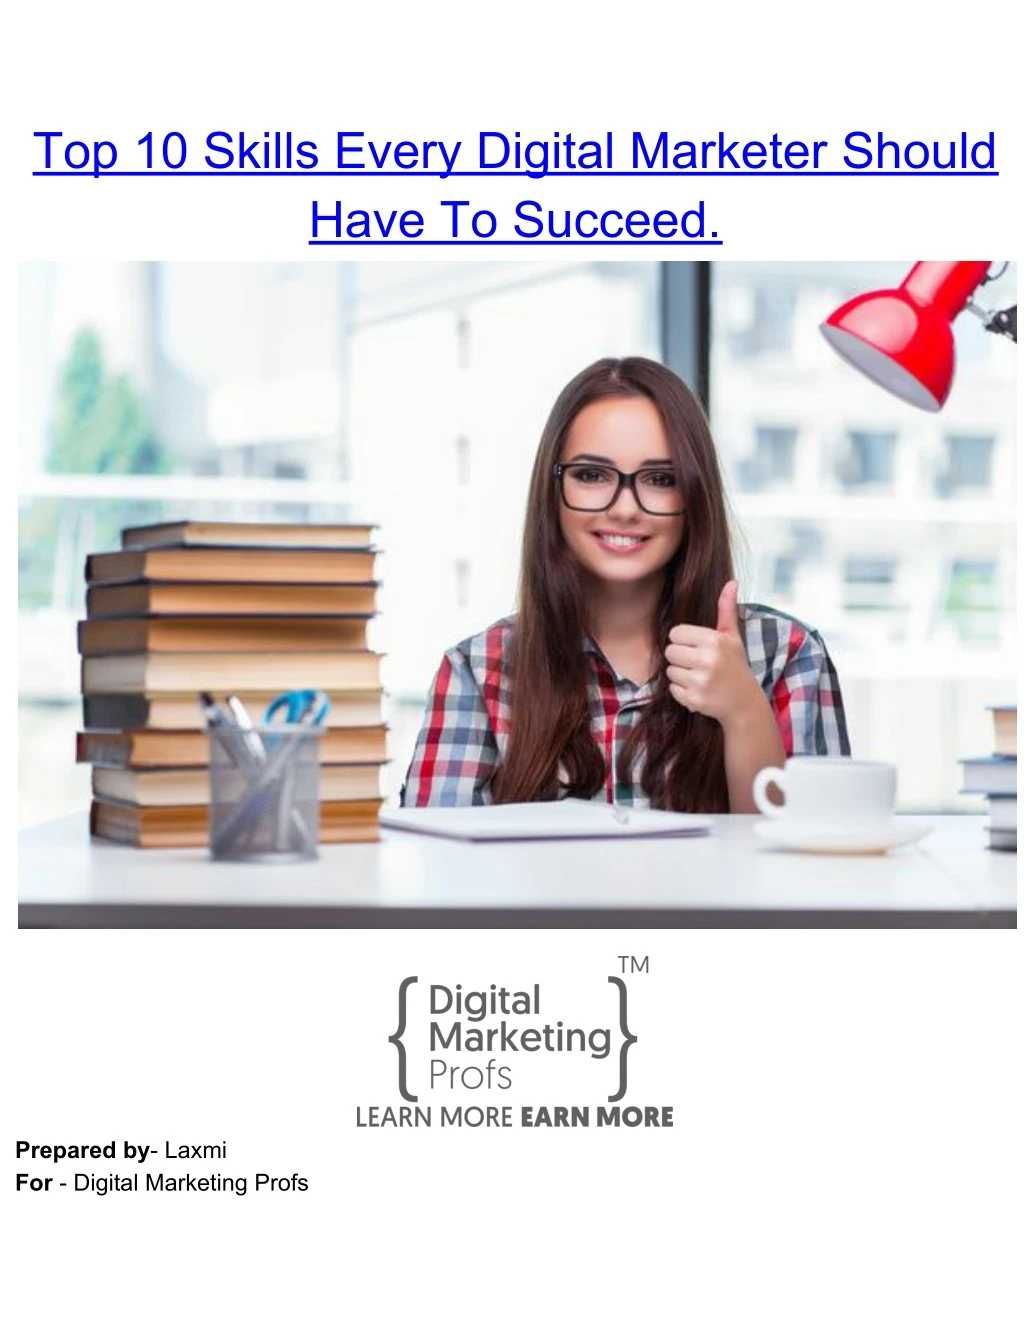 Ppt Top 10 Skills Every Digital Marketer Should Have To Succeed